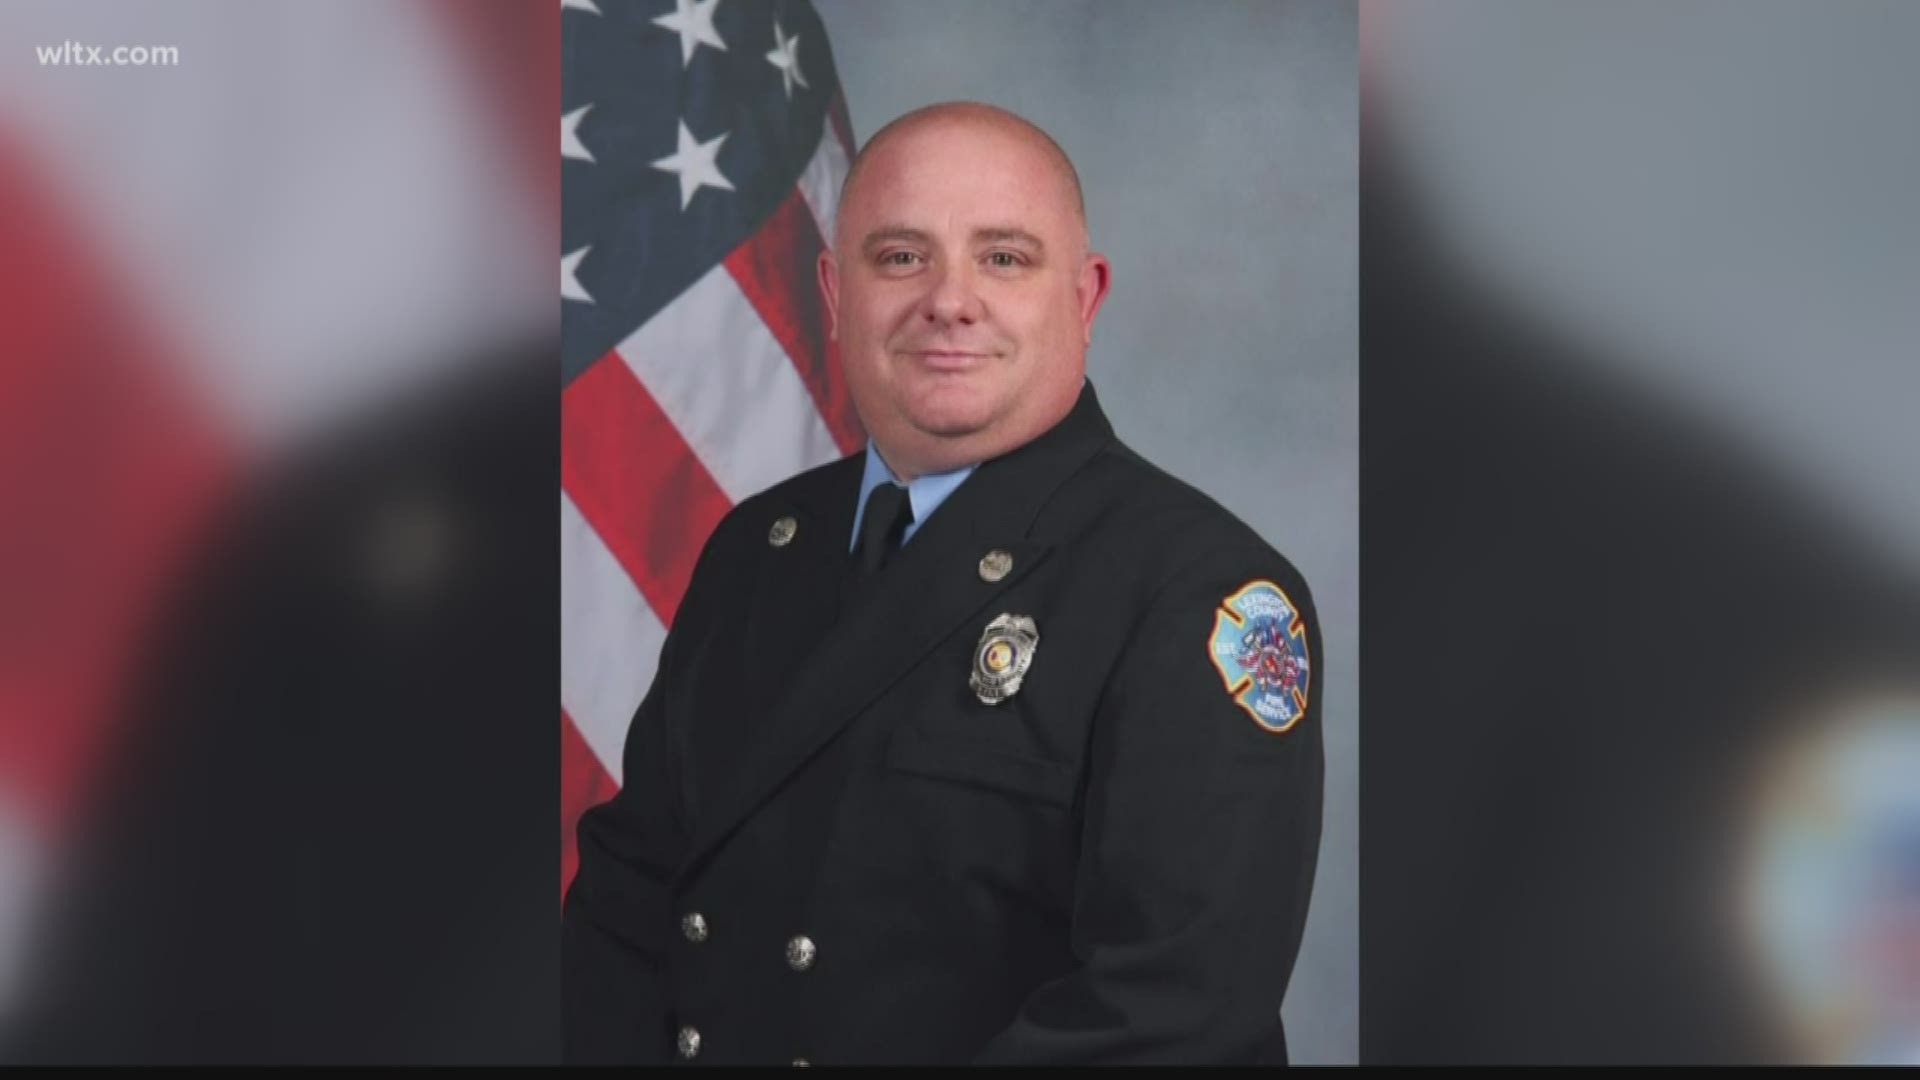 The 46-year-old served for the Lexington County Fire Services for 22 years.